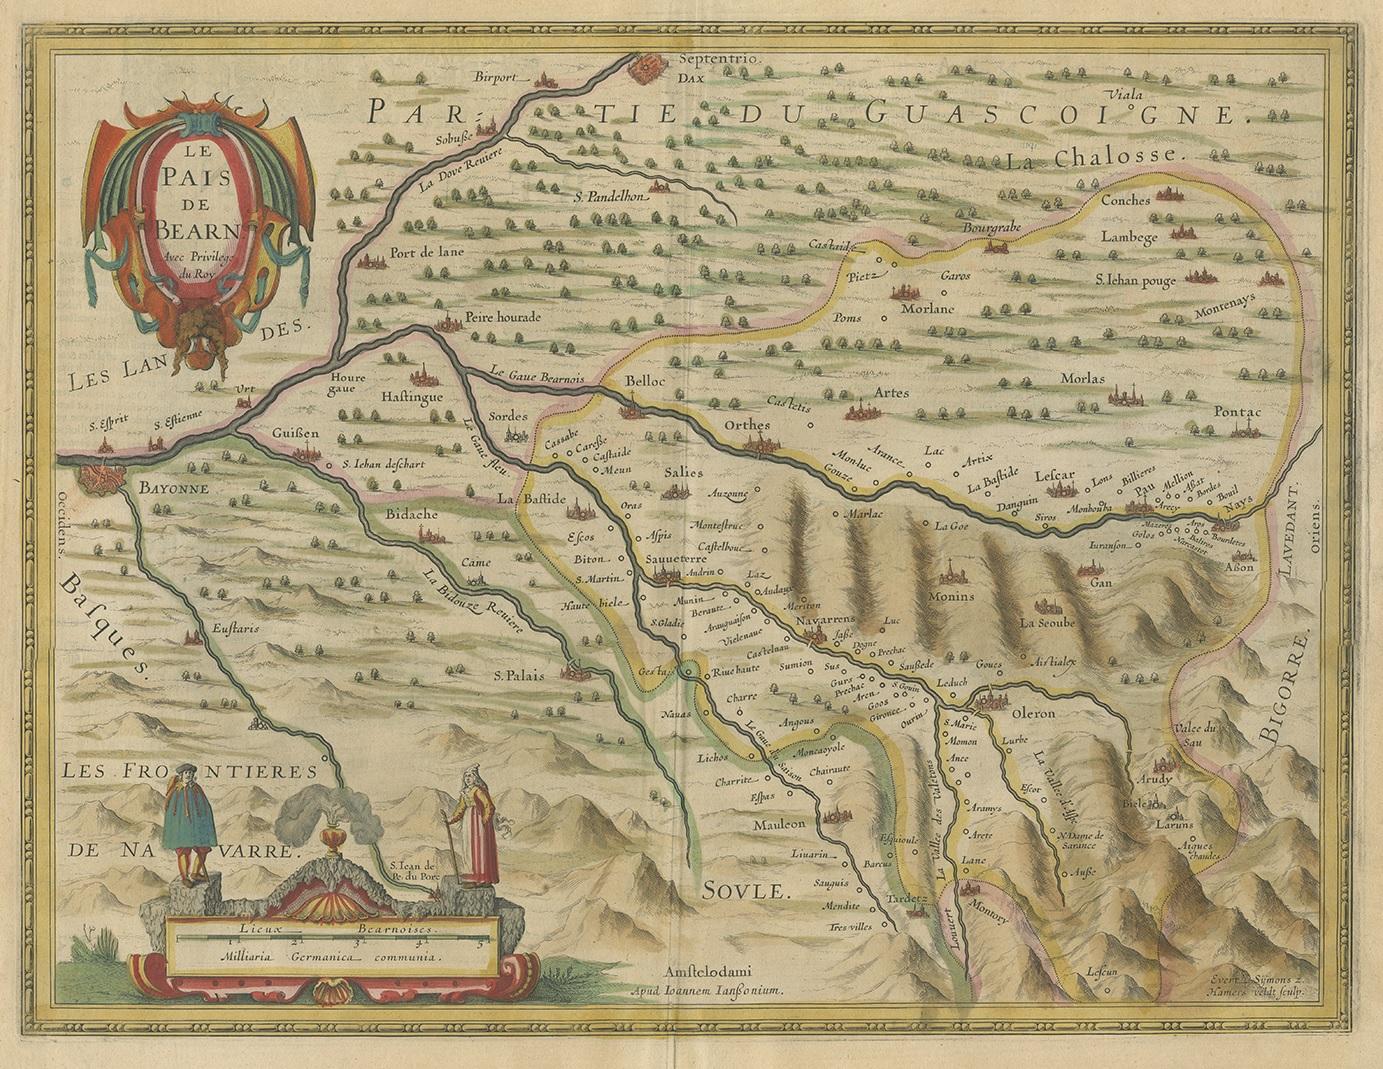 Antique map titled 'Le Pais de Bearn'. Old map of the Béarn region, France. It is one of the traditional provinces of France, located in the Pyrenees mountains and in the plain at their feet, in southwest France. Along with the three Basque